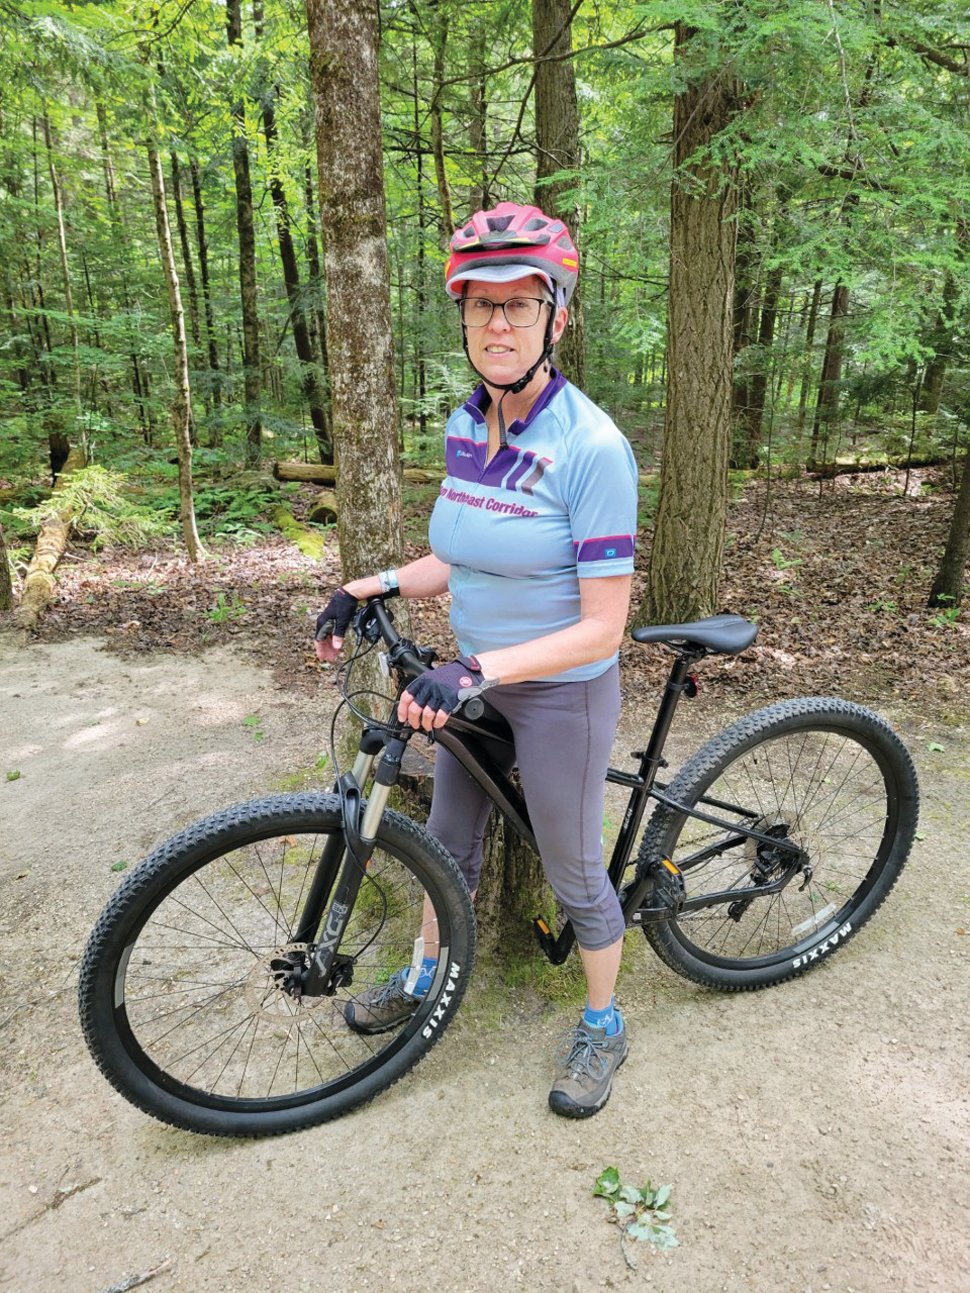 READY TO BIKE: Linda Burrows will participate in this year’s Pan Mass Challenge (PMC) by biking from Wellesley to Patriot Place on a 50-mile route. Her goal each year is to increase the distance she rides within the race. Here she is biking in Vermont three weekends before PMC. (Submitted photo)